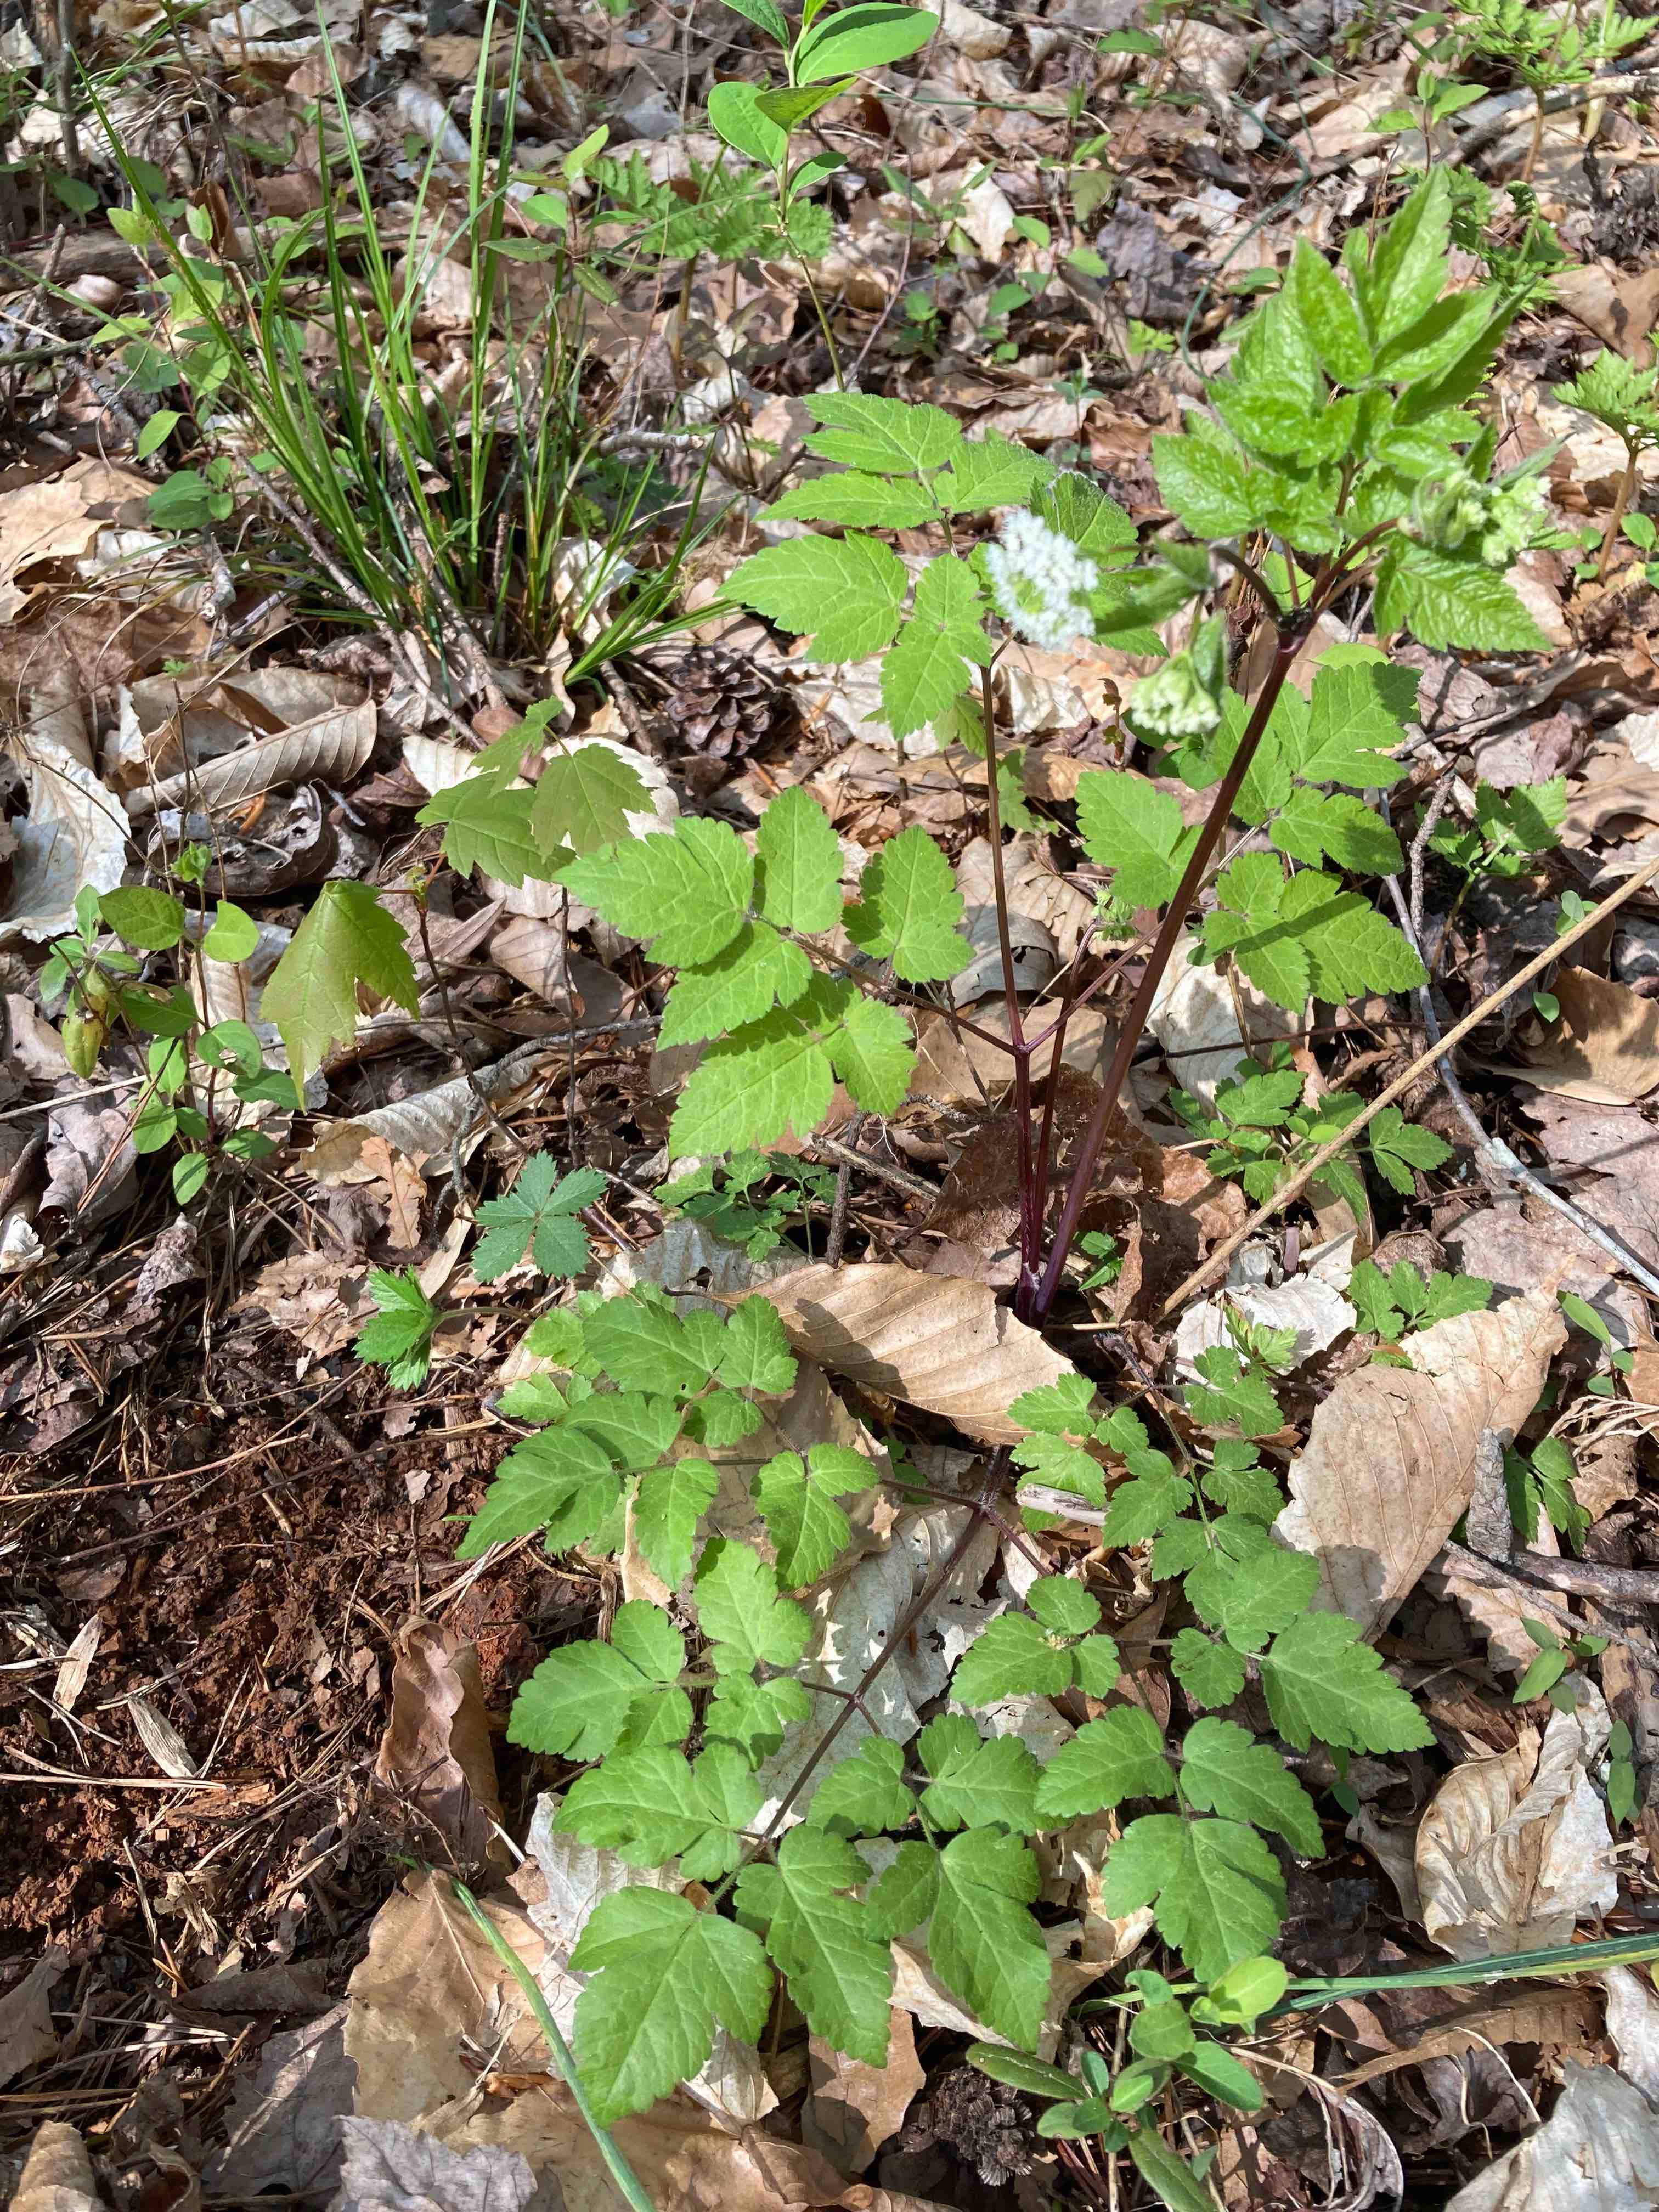 The Scientific Name is Osmorhiza longistylis. You will likely hear them called Anise-root, Sweet Cicely, Smooth Sweet Cicely, Longstyle Sweetroot, Licorice Root, Wild Anise. This picture shows the This perennial plant- native to rich, moist woods- grows to about 1-3 ft tall. of Osmorhiza longistylis